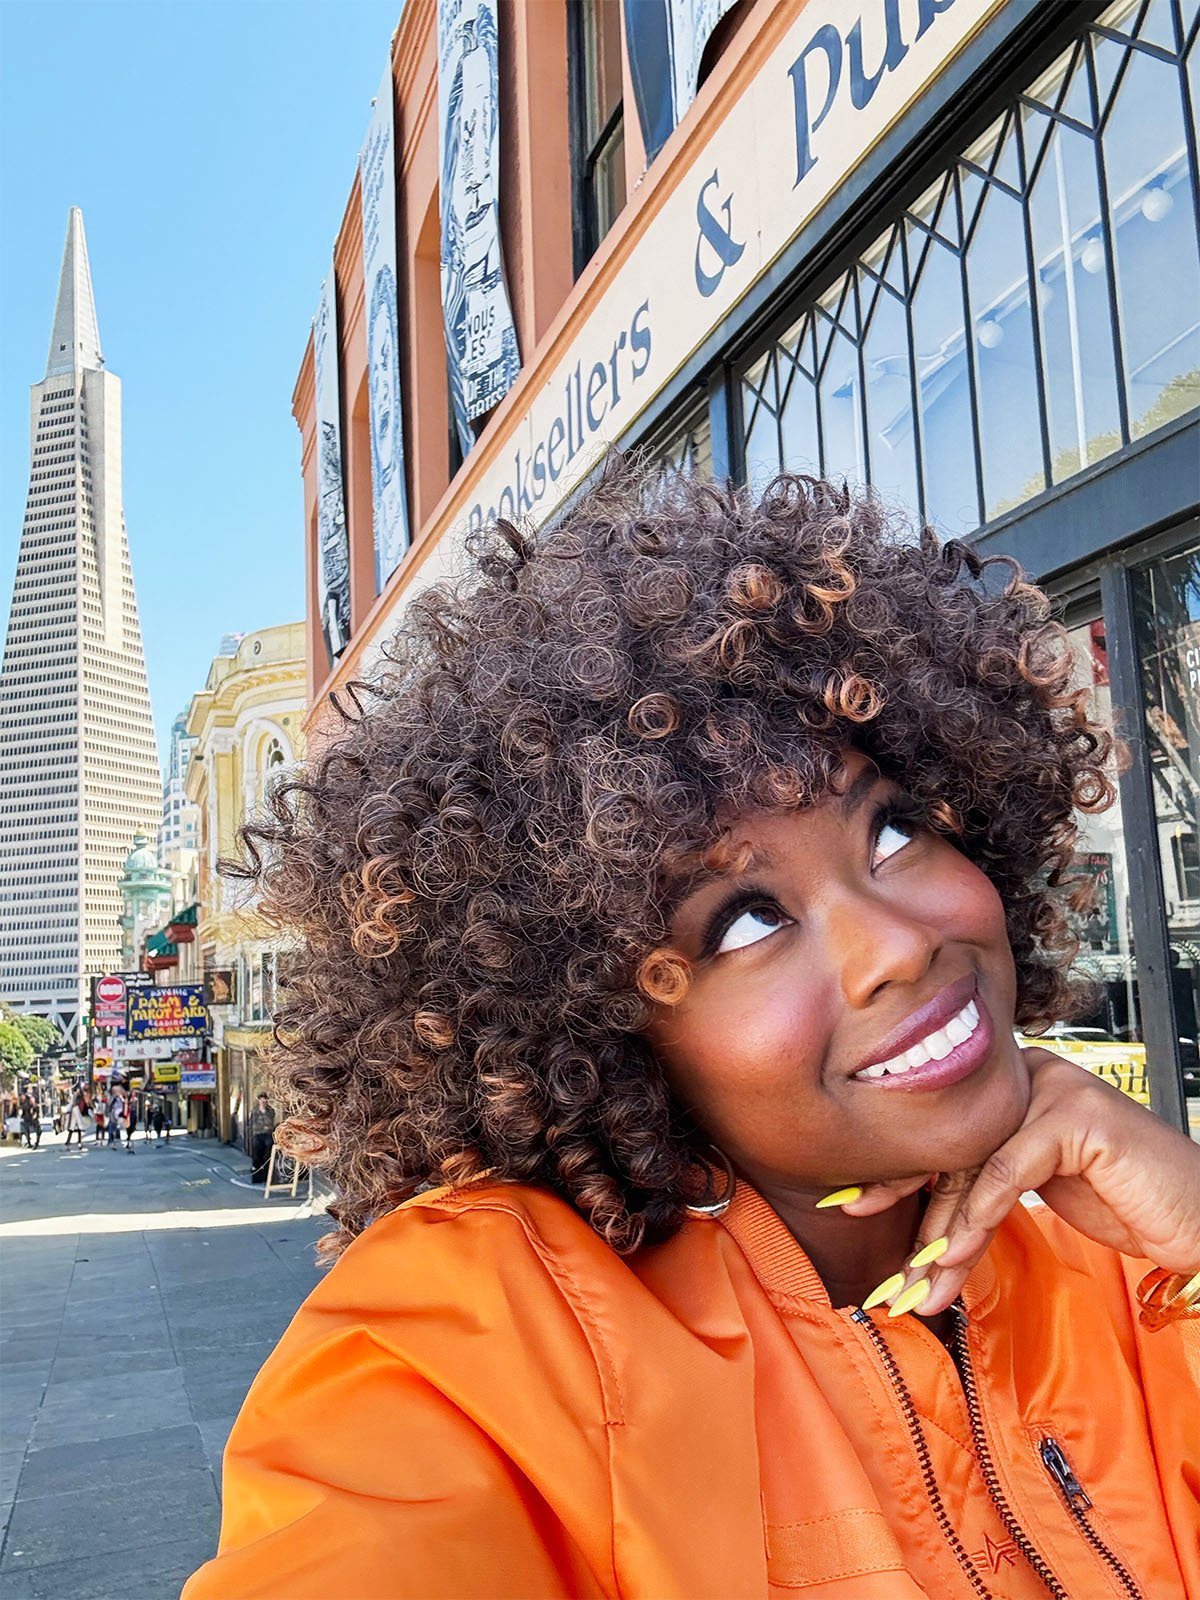 A woman with curly hair and an orange jacket smiles while looking upwards. She is standing on a city street with a tall, pointed skyscraper in the background. The façade of a bookstore is also visible.